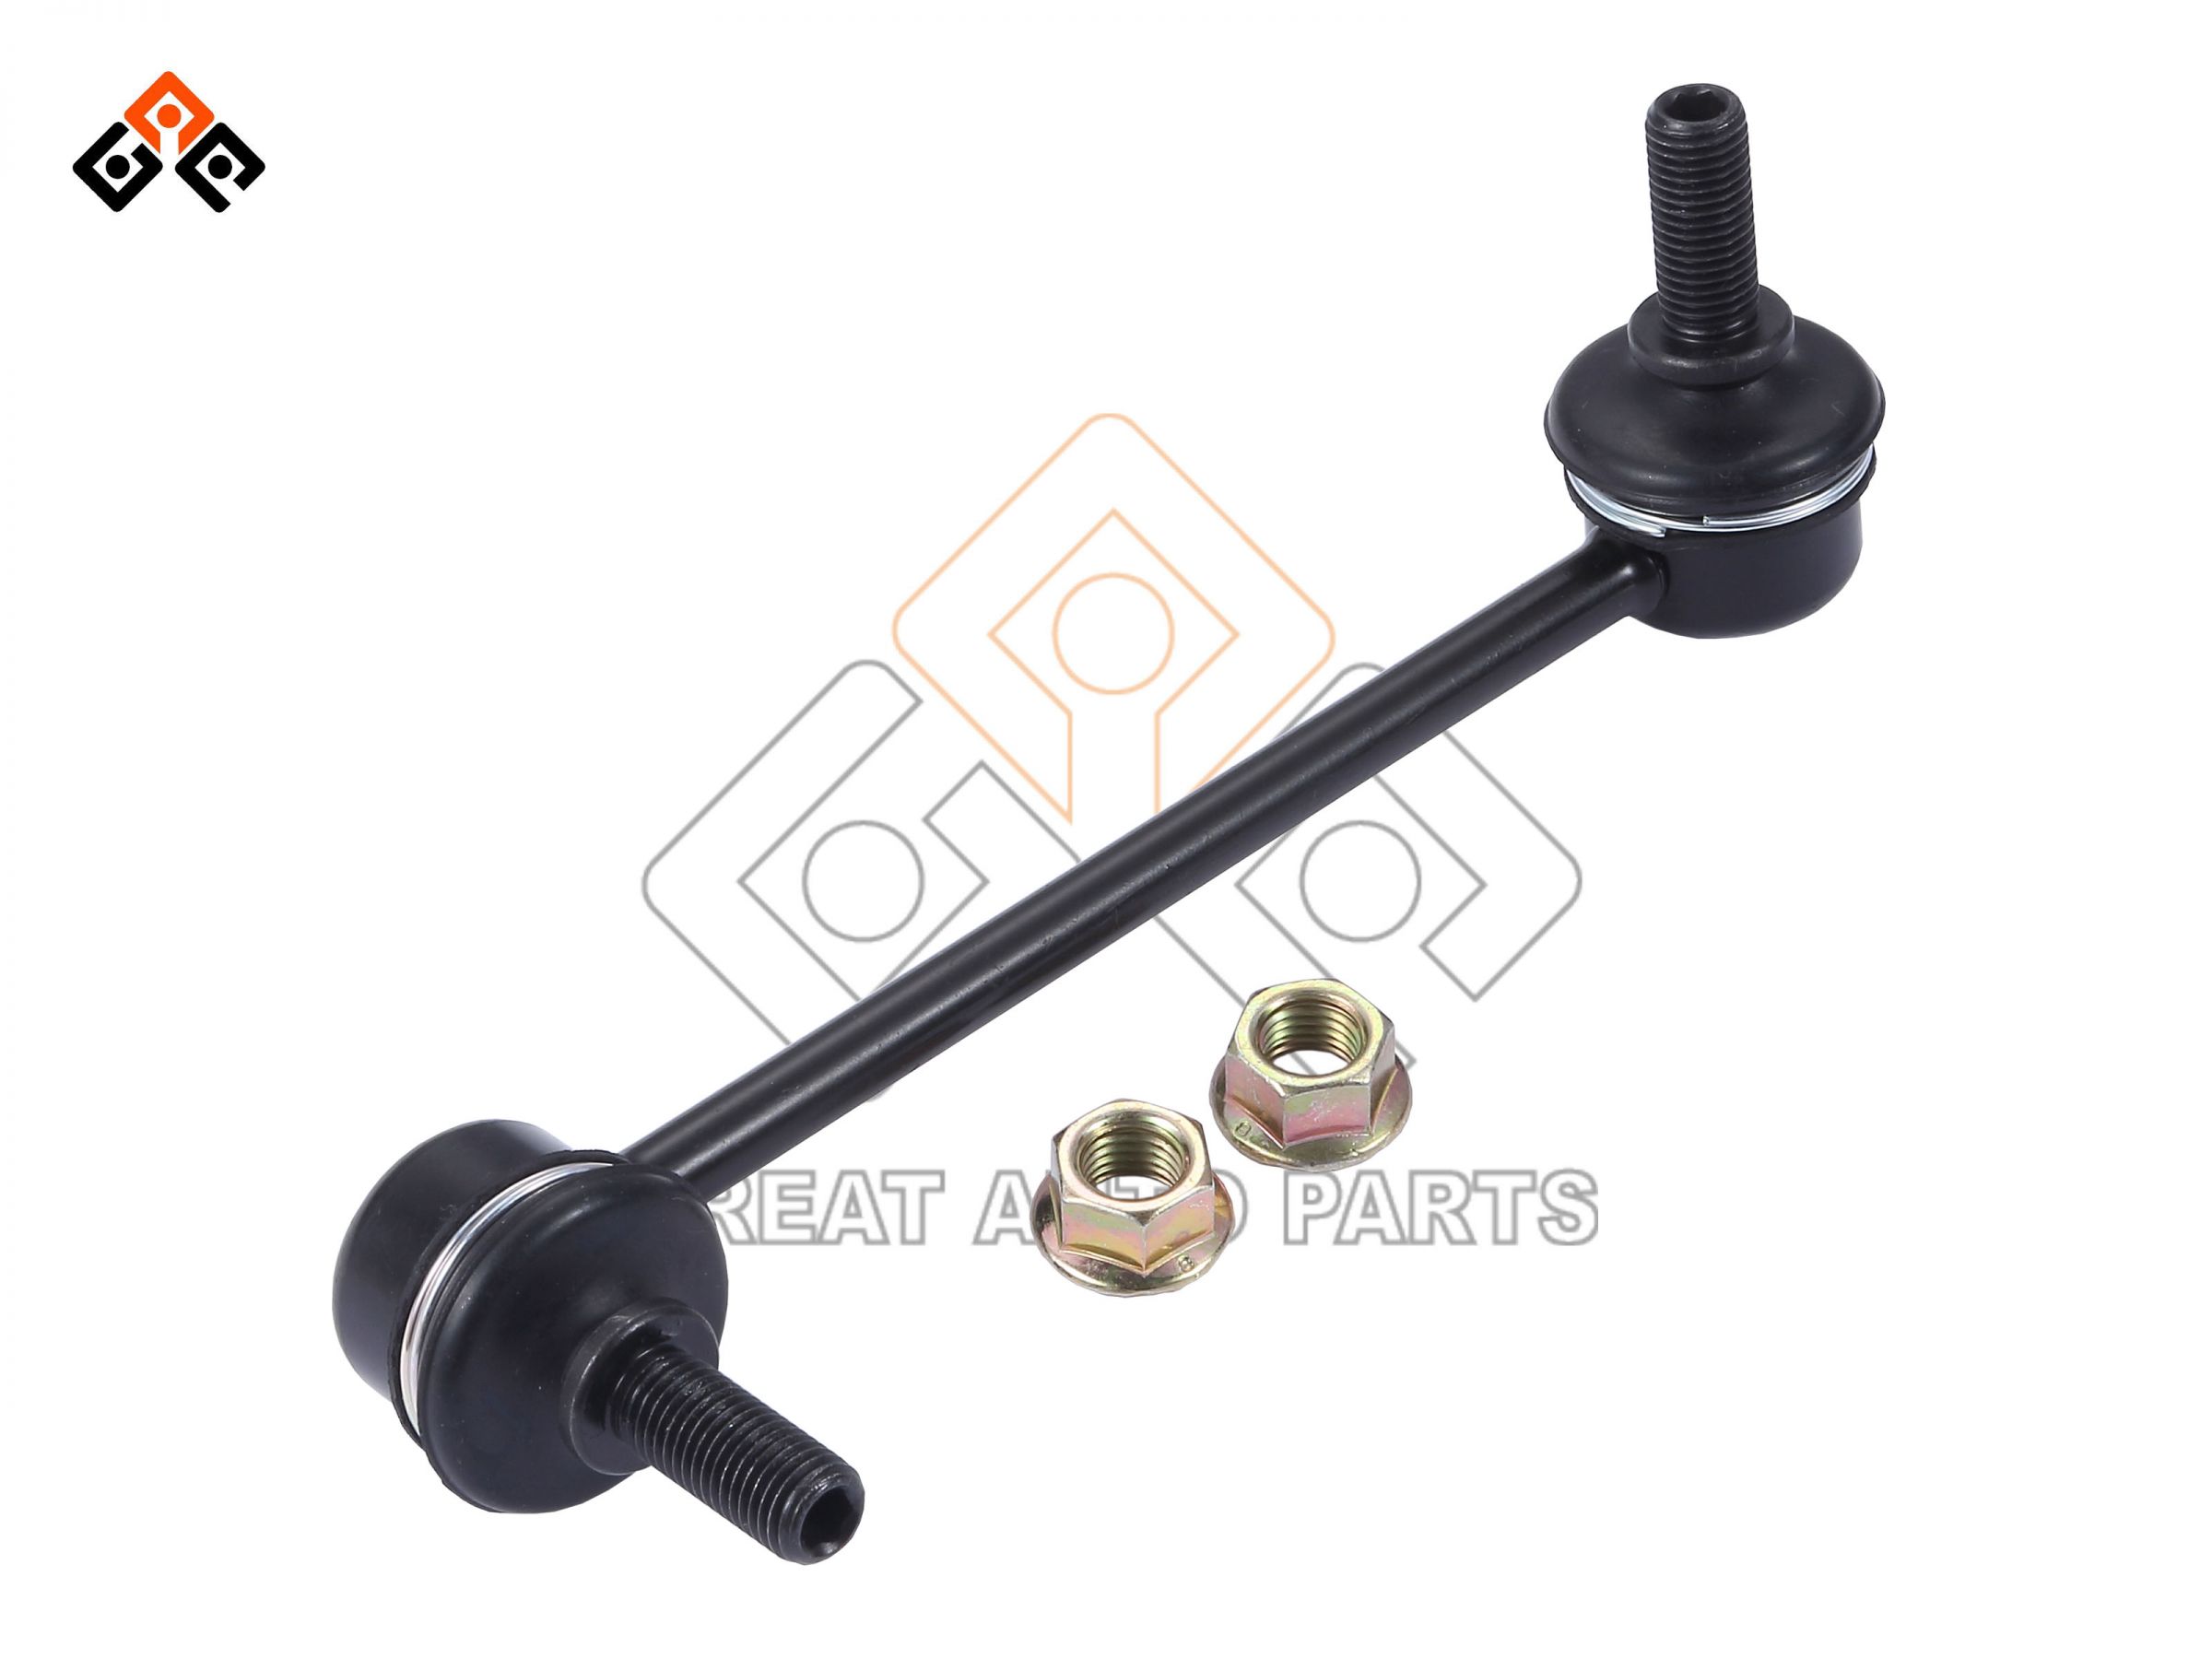 Boost stability, control, and driving with Stabilizer Link replacements